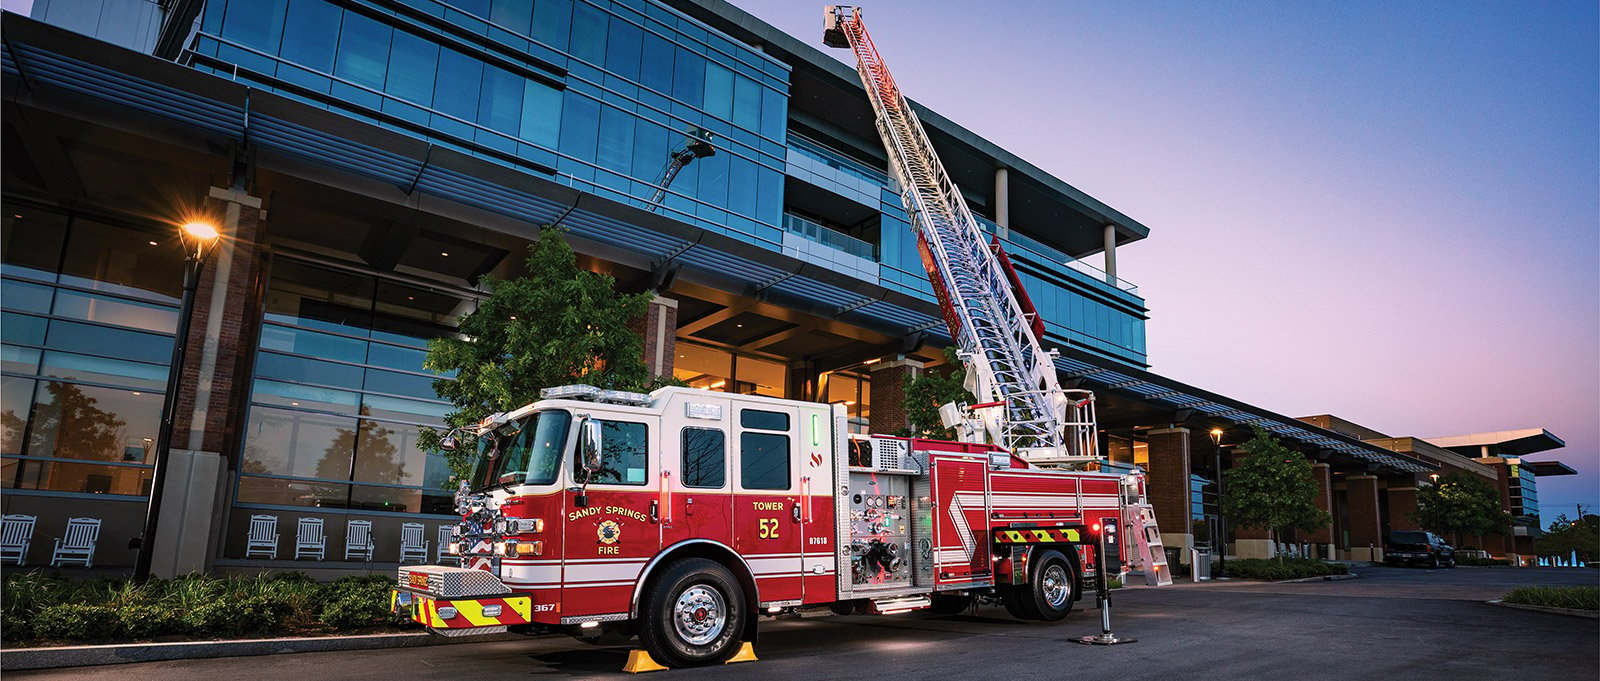 A red and white pumper fire apparatus with an aerial device is pictured with the aerial device deployed shooting water in front of a large glass and brick building.